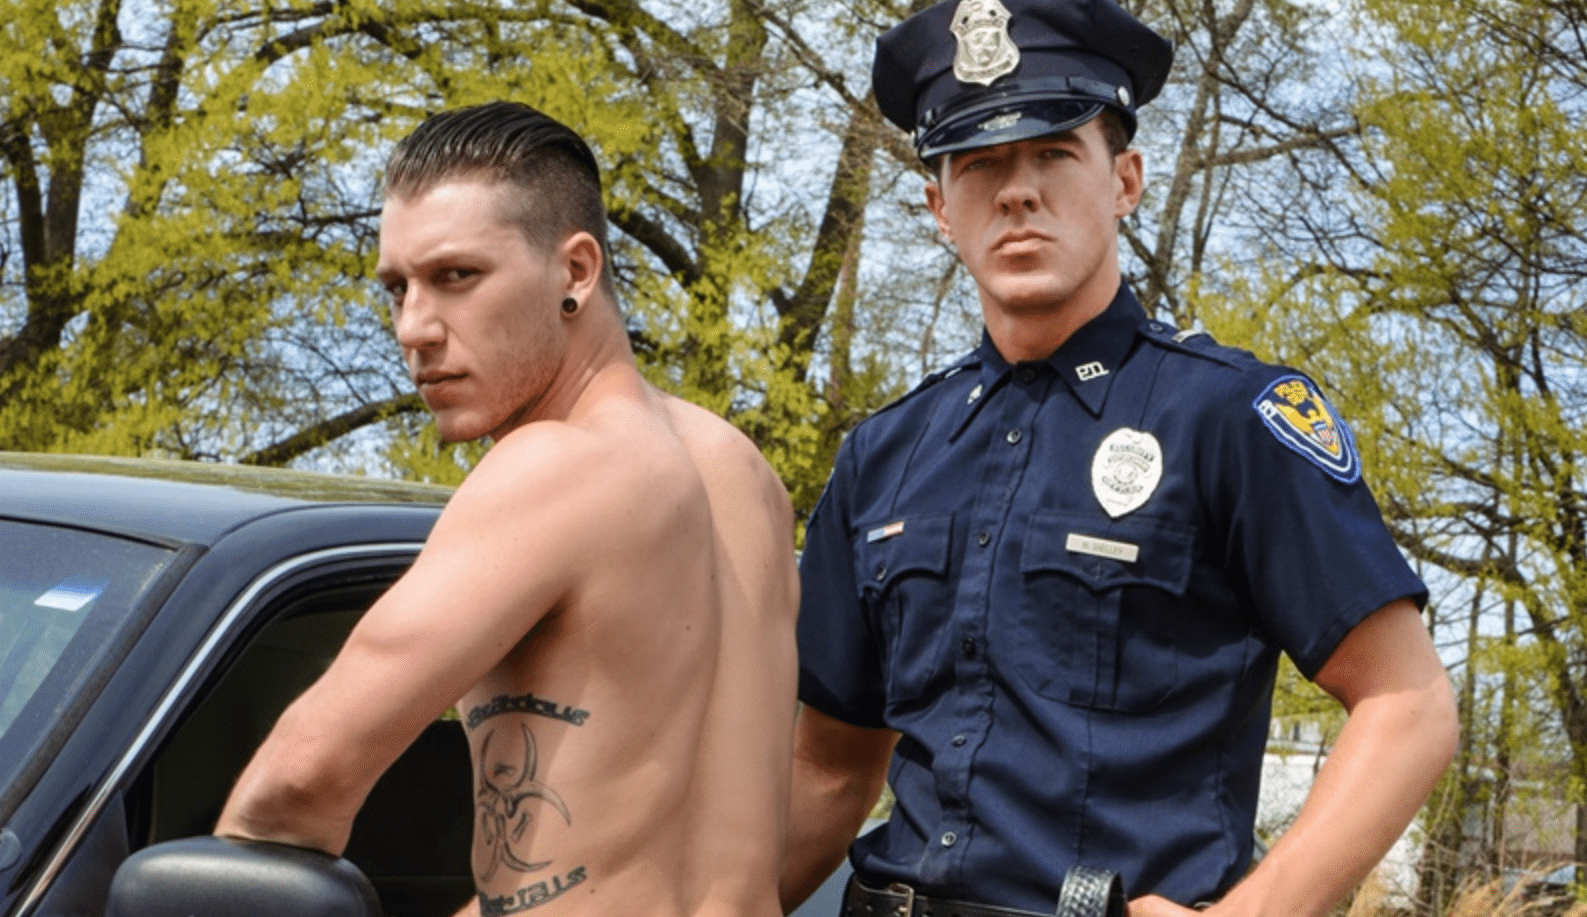 Gay porn viewers were into cops more than anything else in 2017